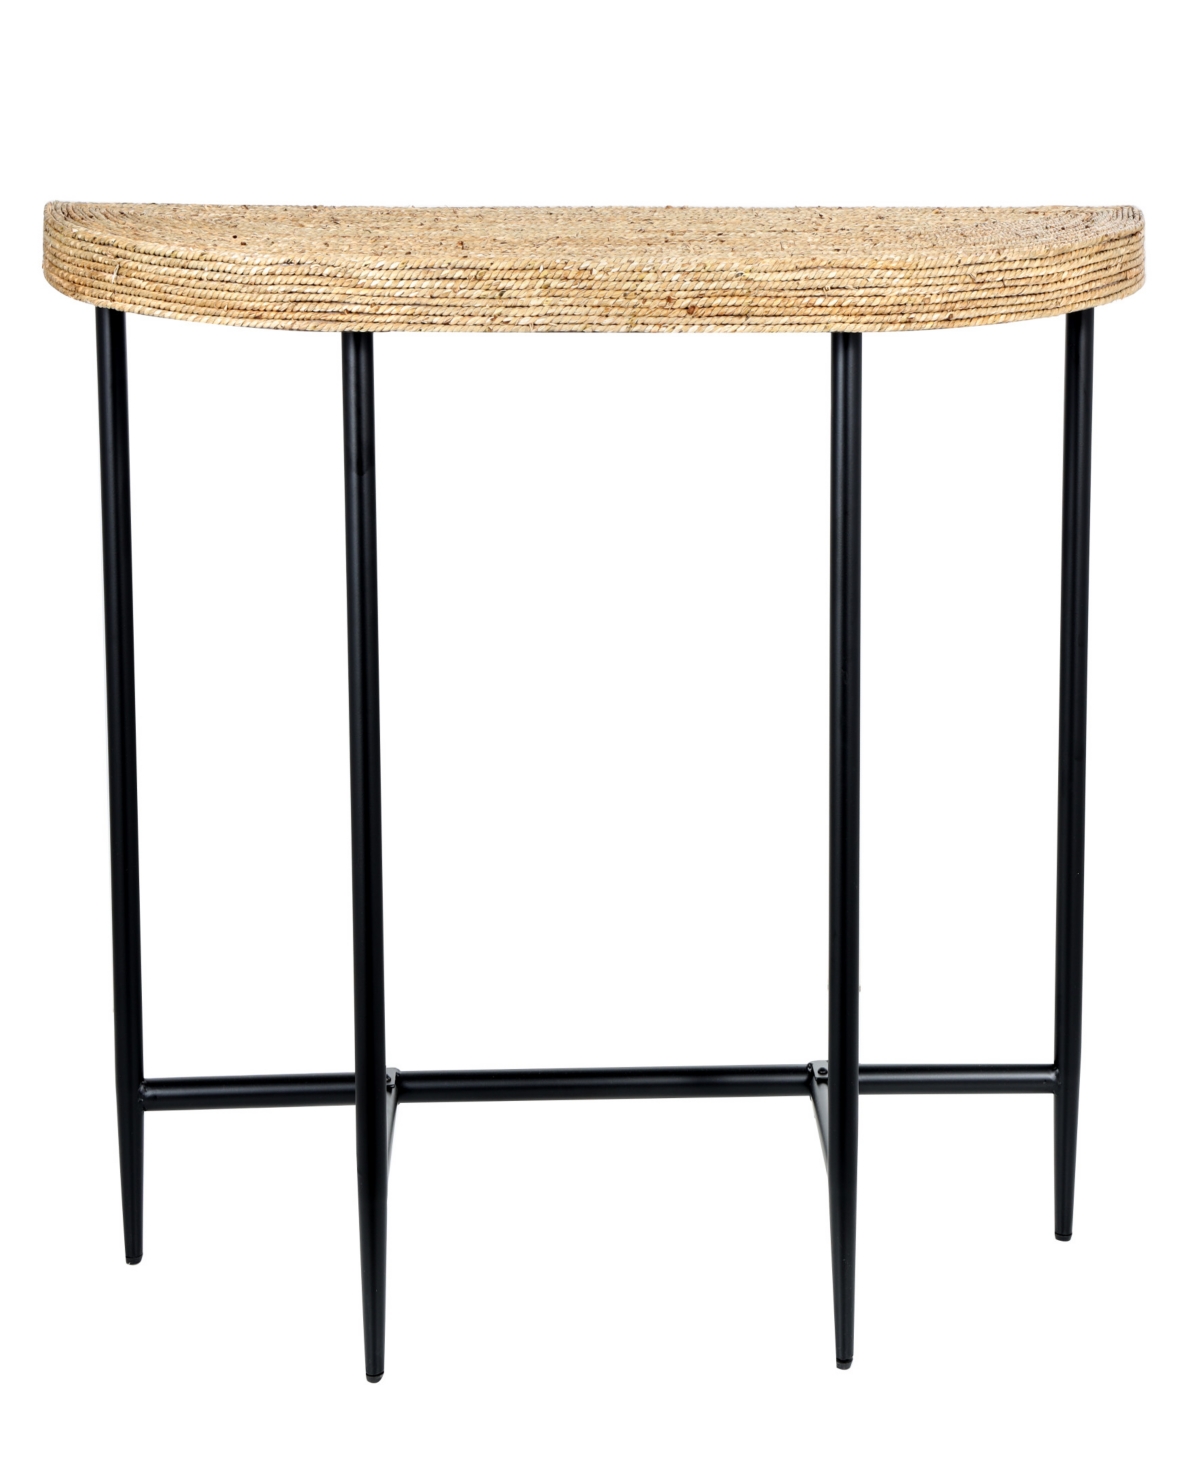 Shop Rosemary Lane 48" X 16" X 32" Seagrass Woven Half Moon Black Metal Legs Console Table In Brown